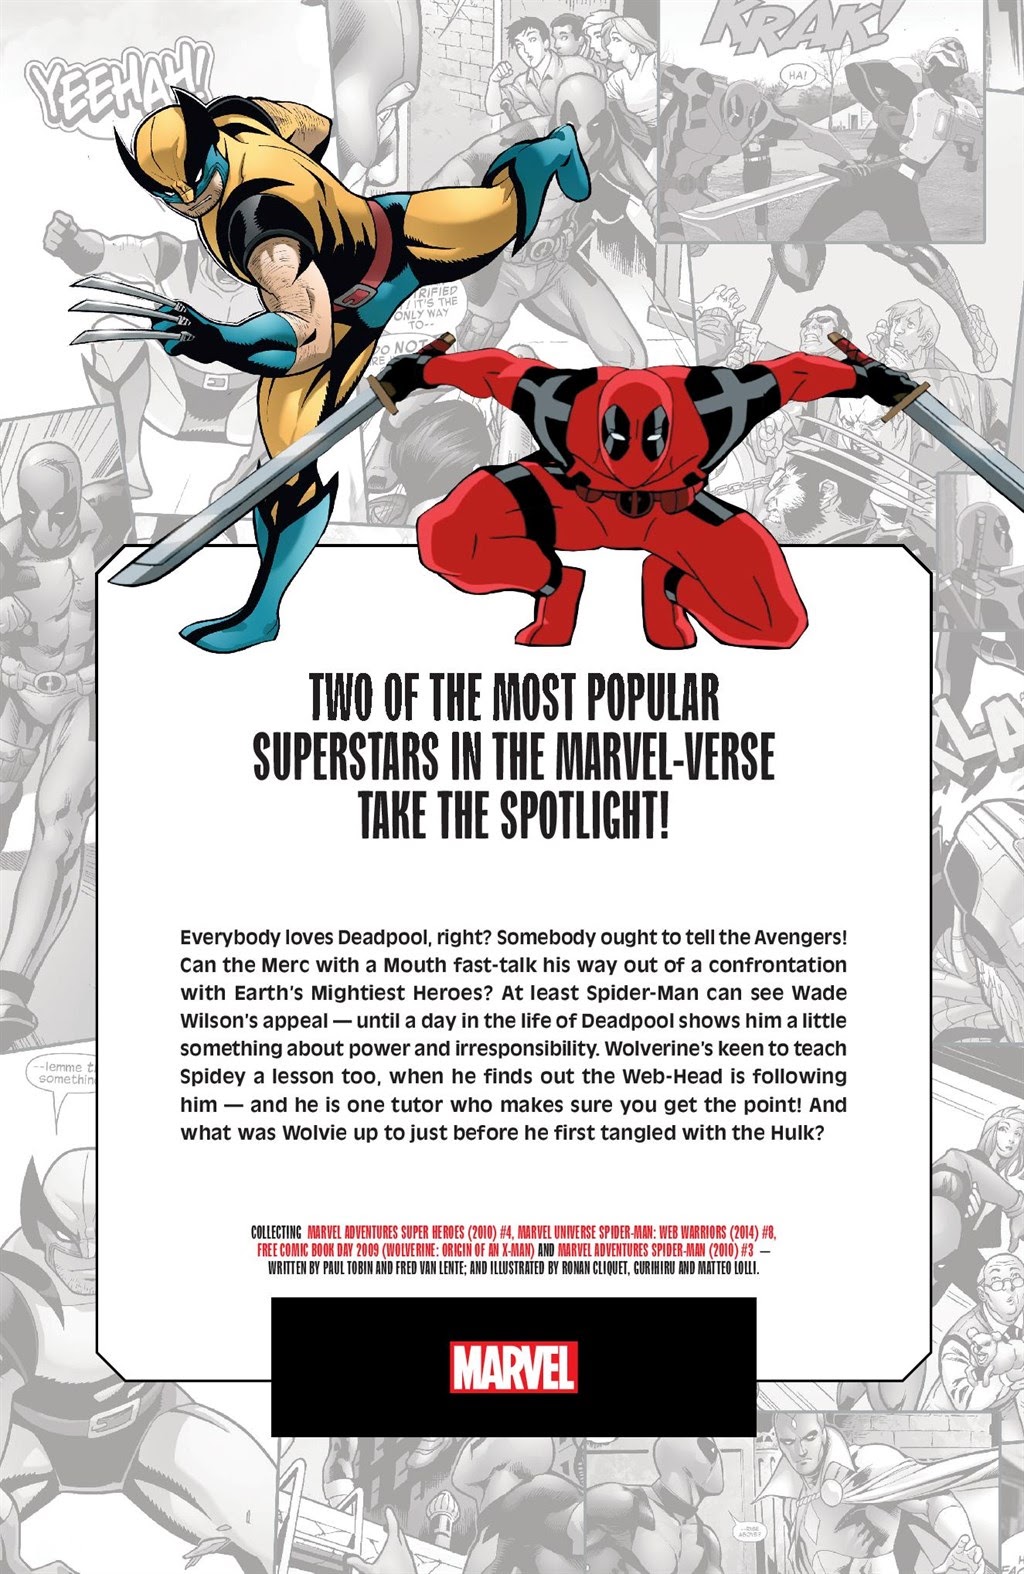 Read online Marvel-Verse (2020) comic -  Issue # Deadpool and Wolverine - 95